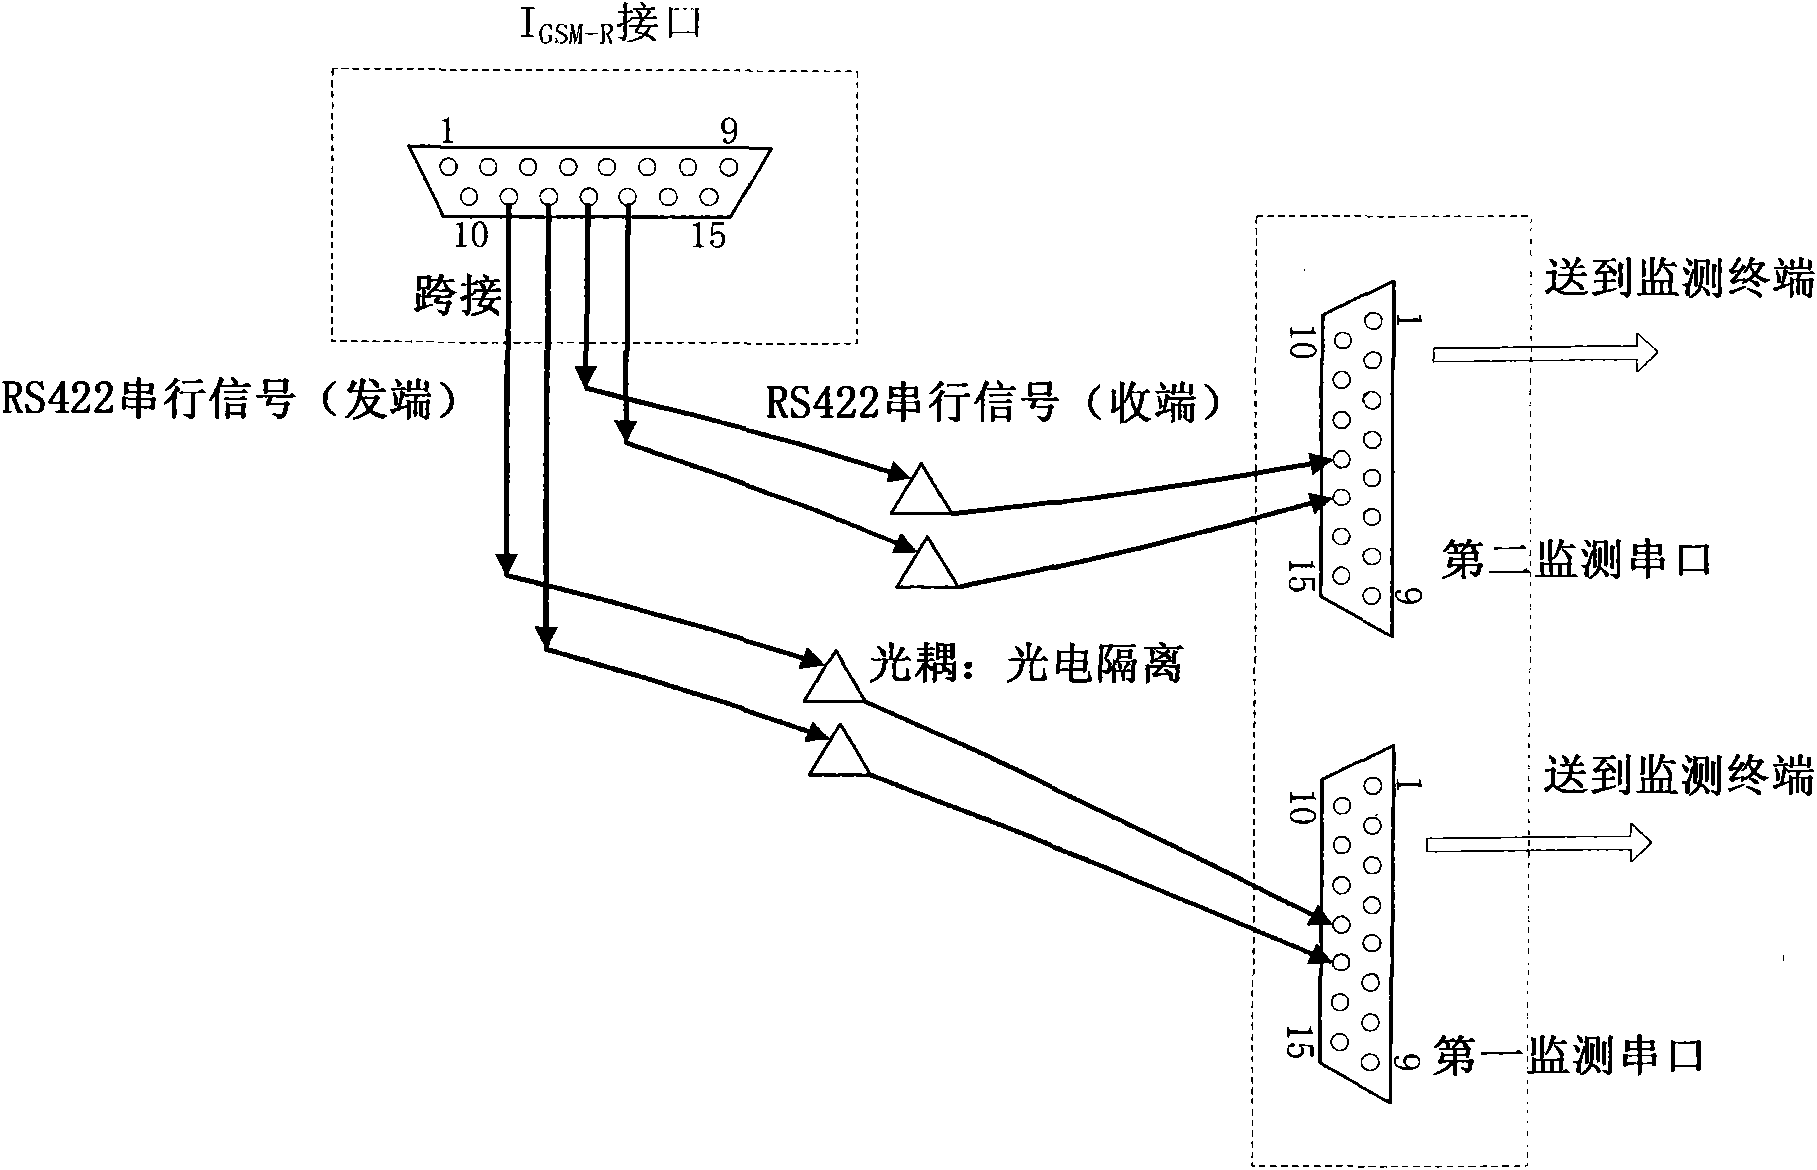 Vehicle monitoring system based on CTCS-3 level train control system and terminal thereof